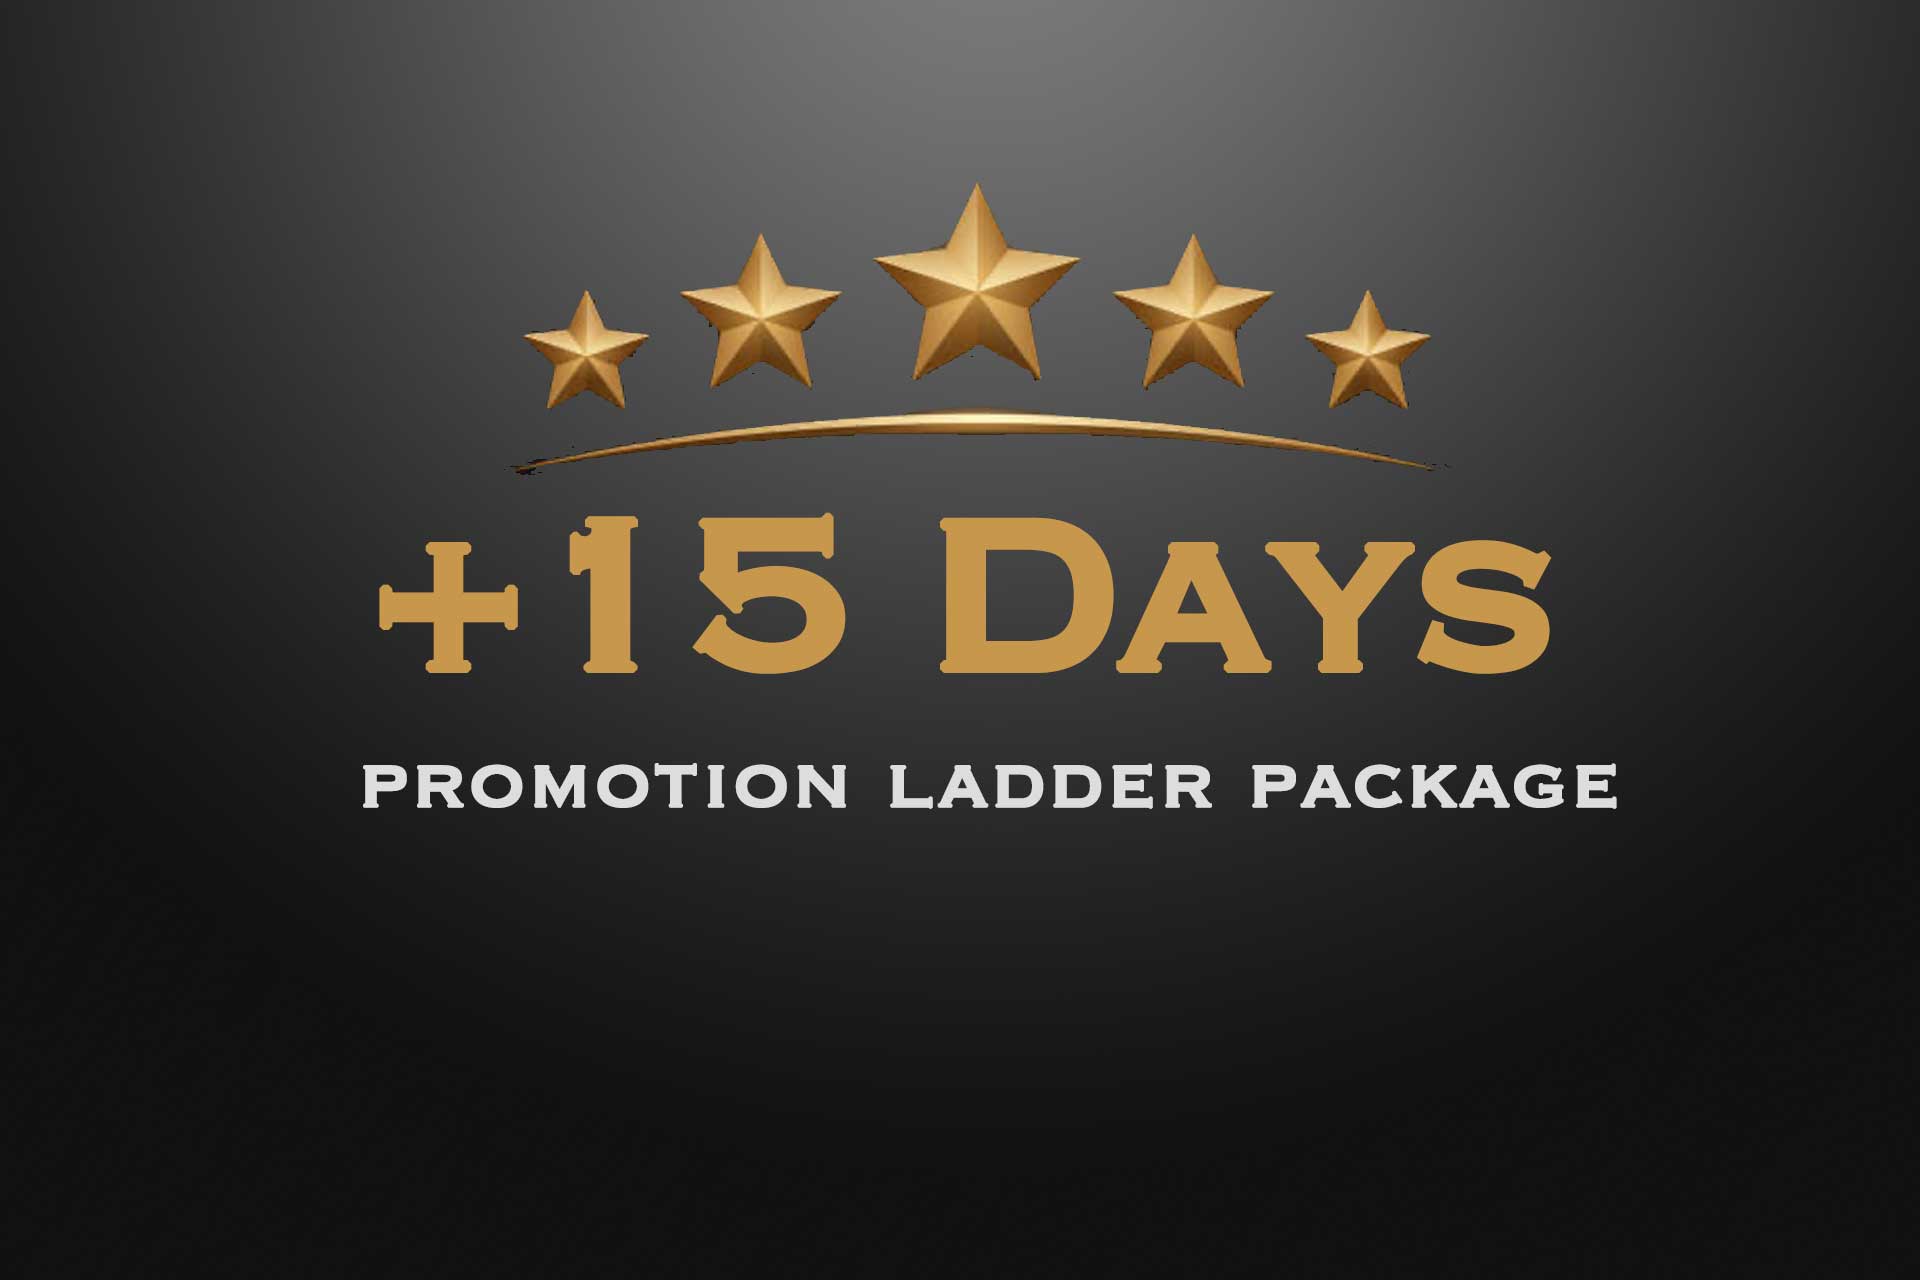 15-day promotion ladder package